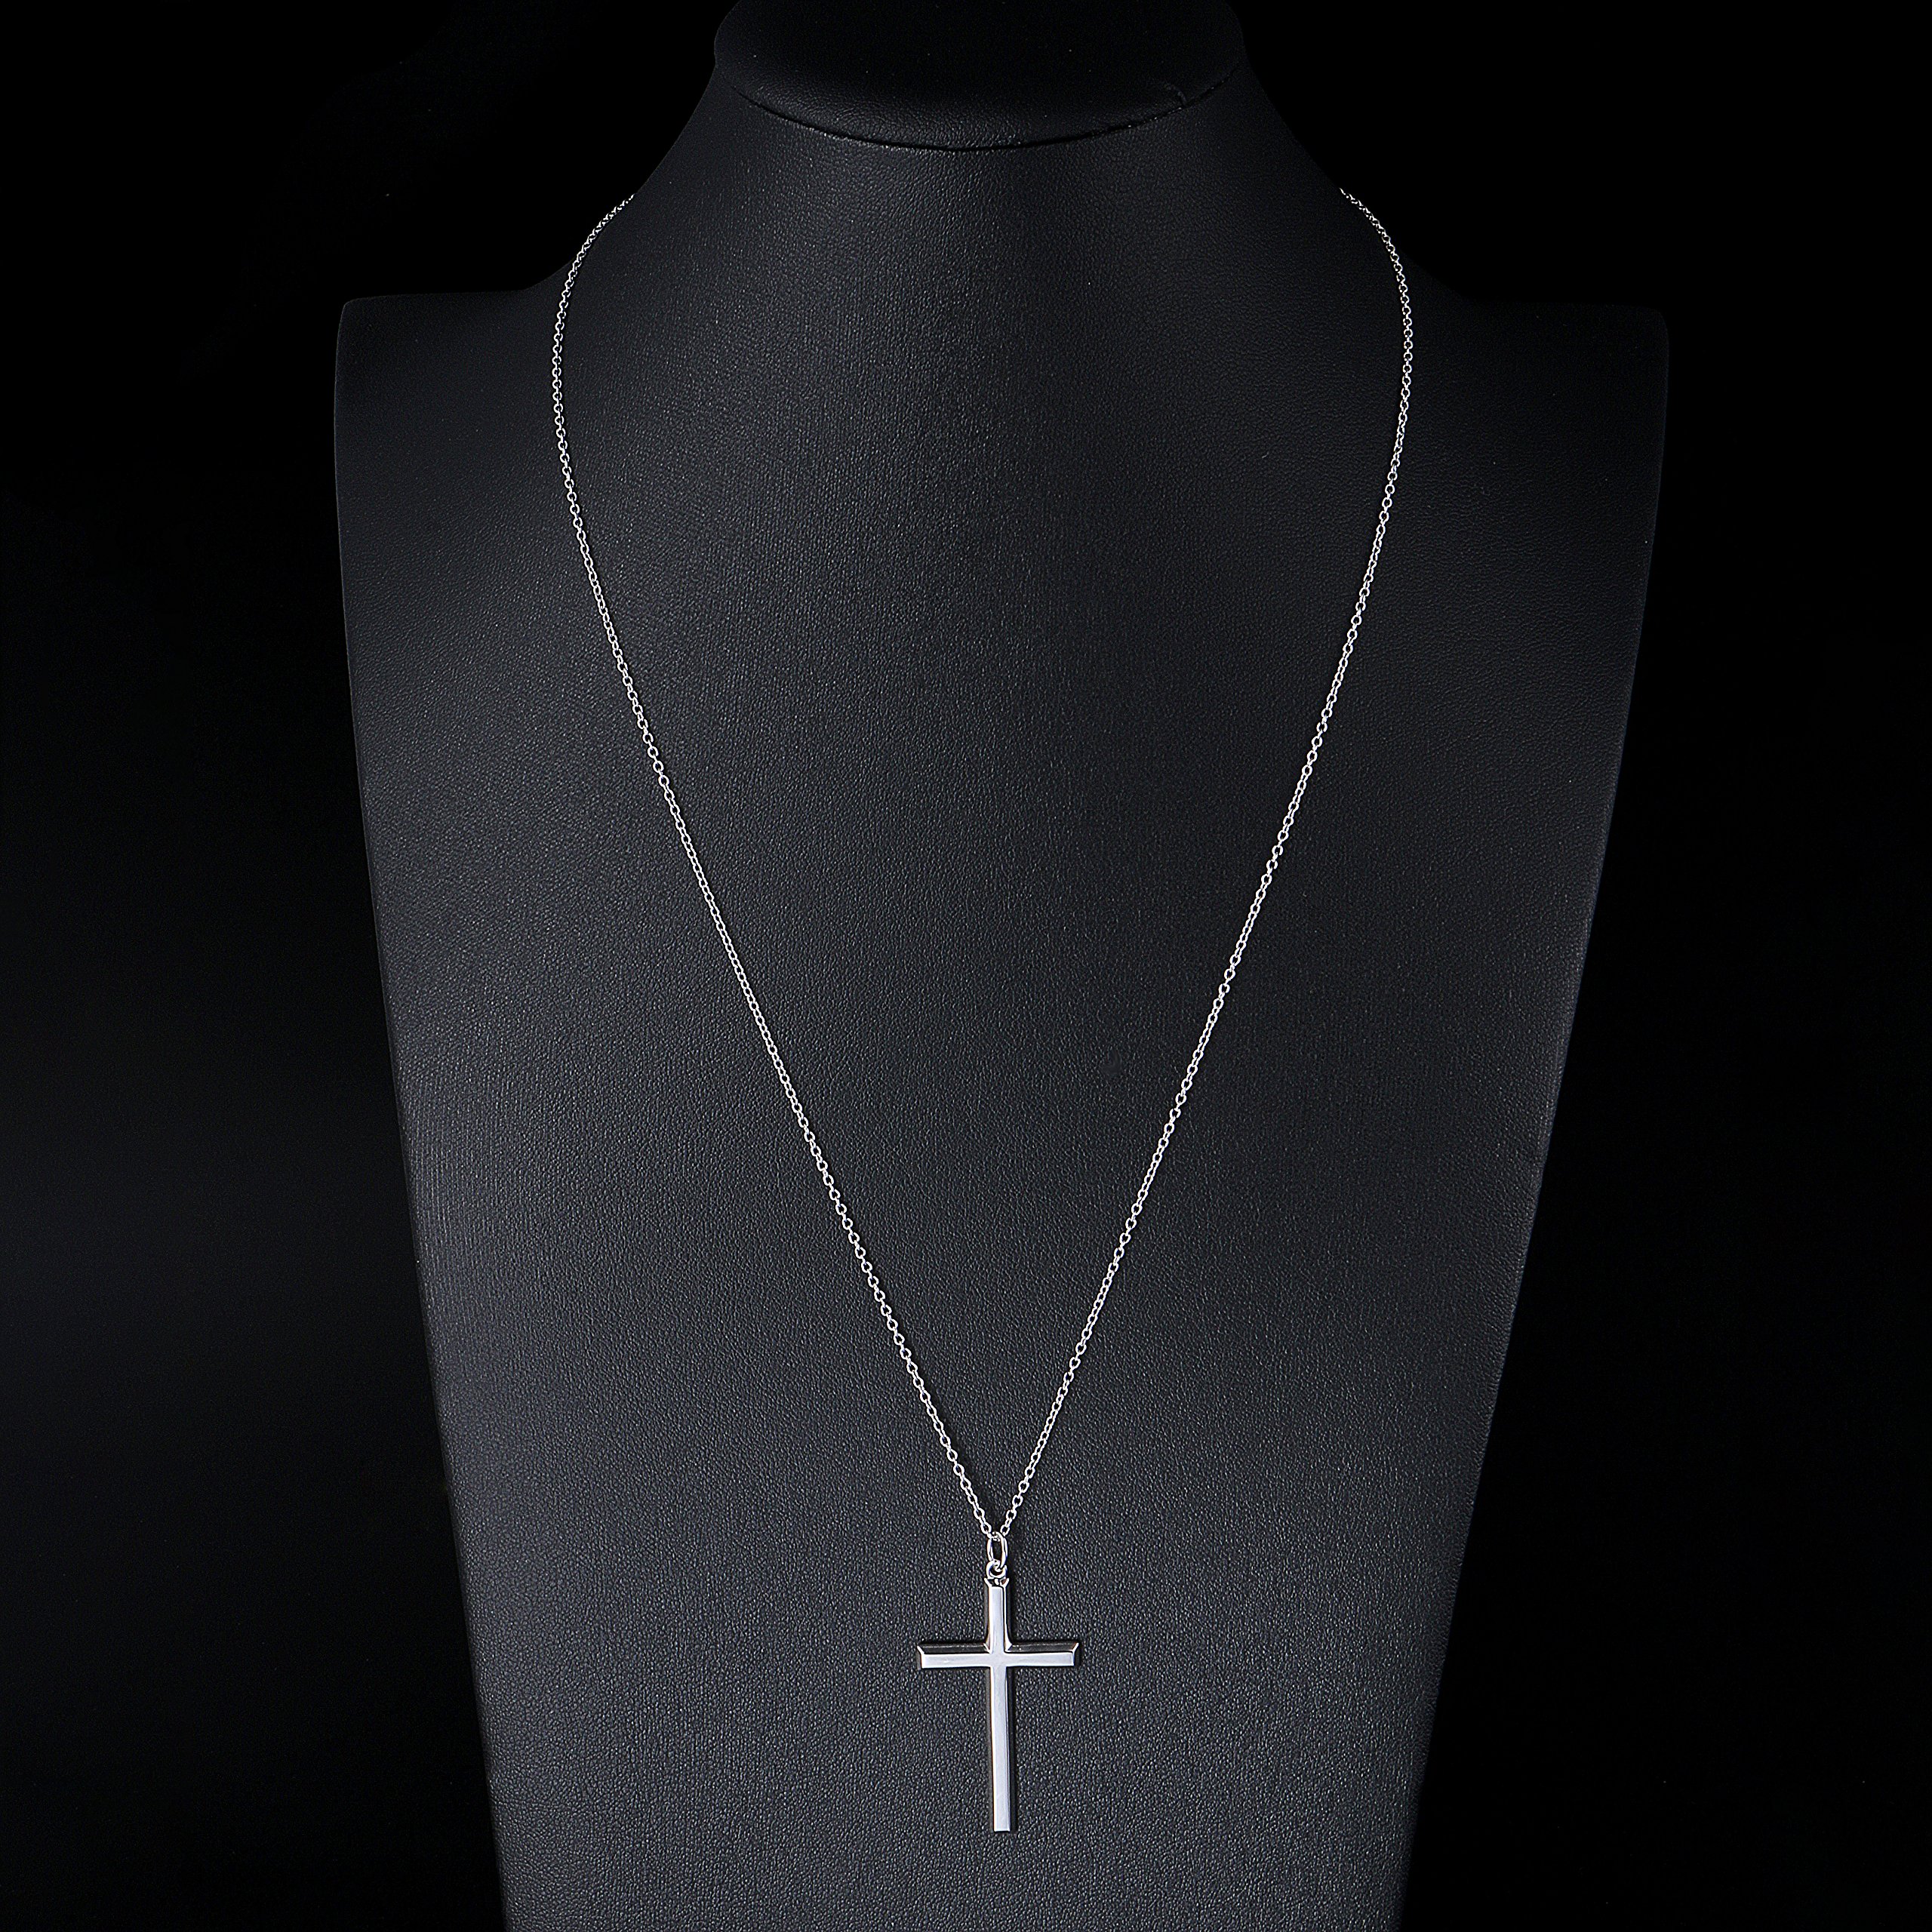 Mens S925 Sterling Silver Large Cross Pendant Necklace 24 Inches Silver Chain